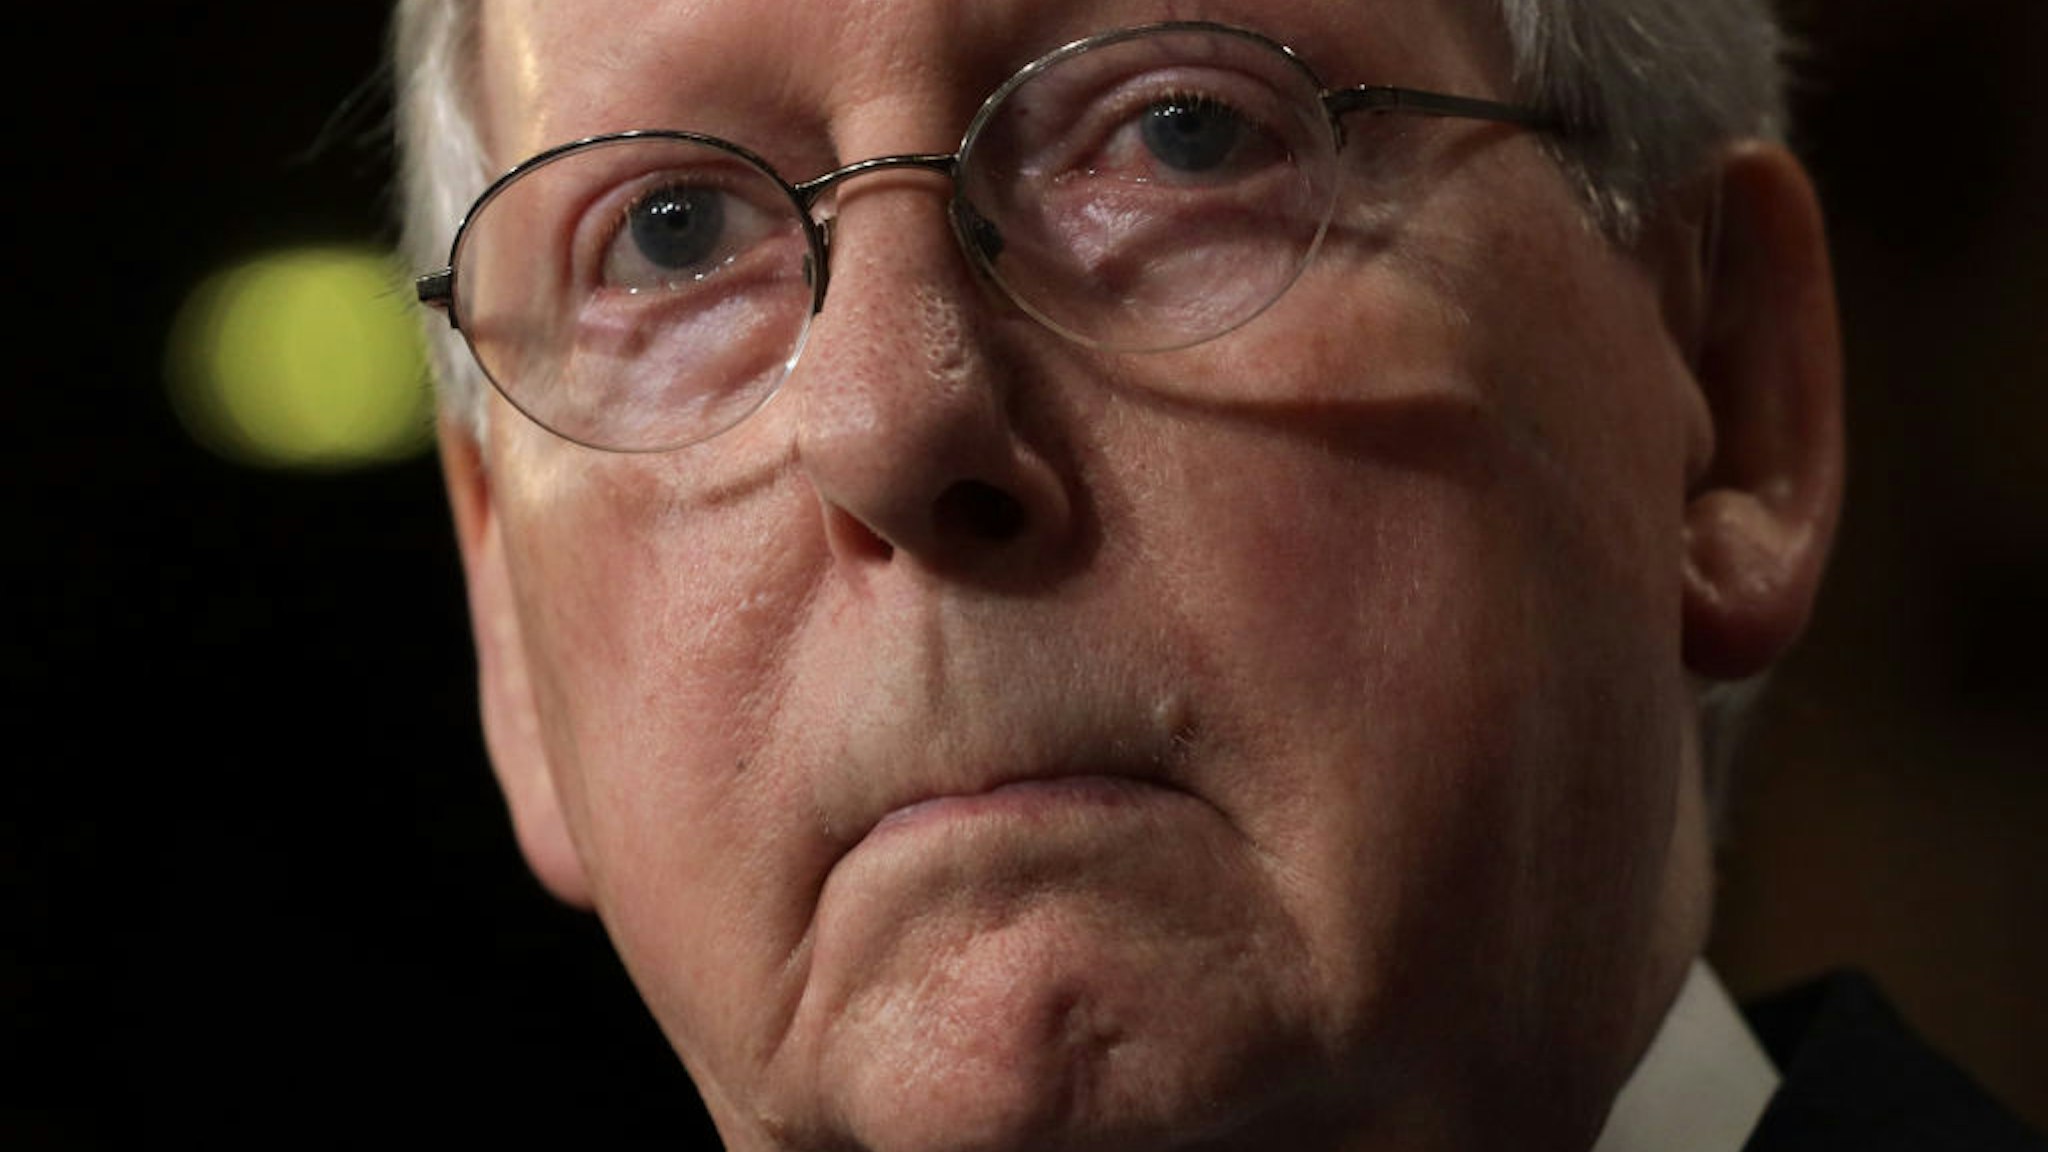 U.S. Senate Majority Leader Sen. Mitch McConnell (R-KY) listens during a news conference at the U.S. Capitol March 17, 2020 in Washington, DC.